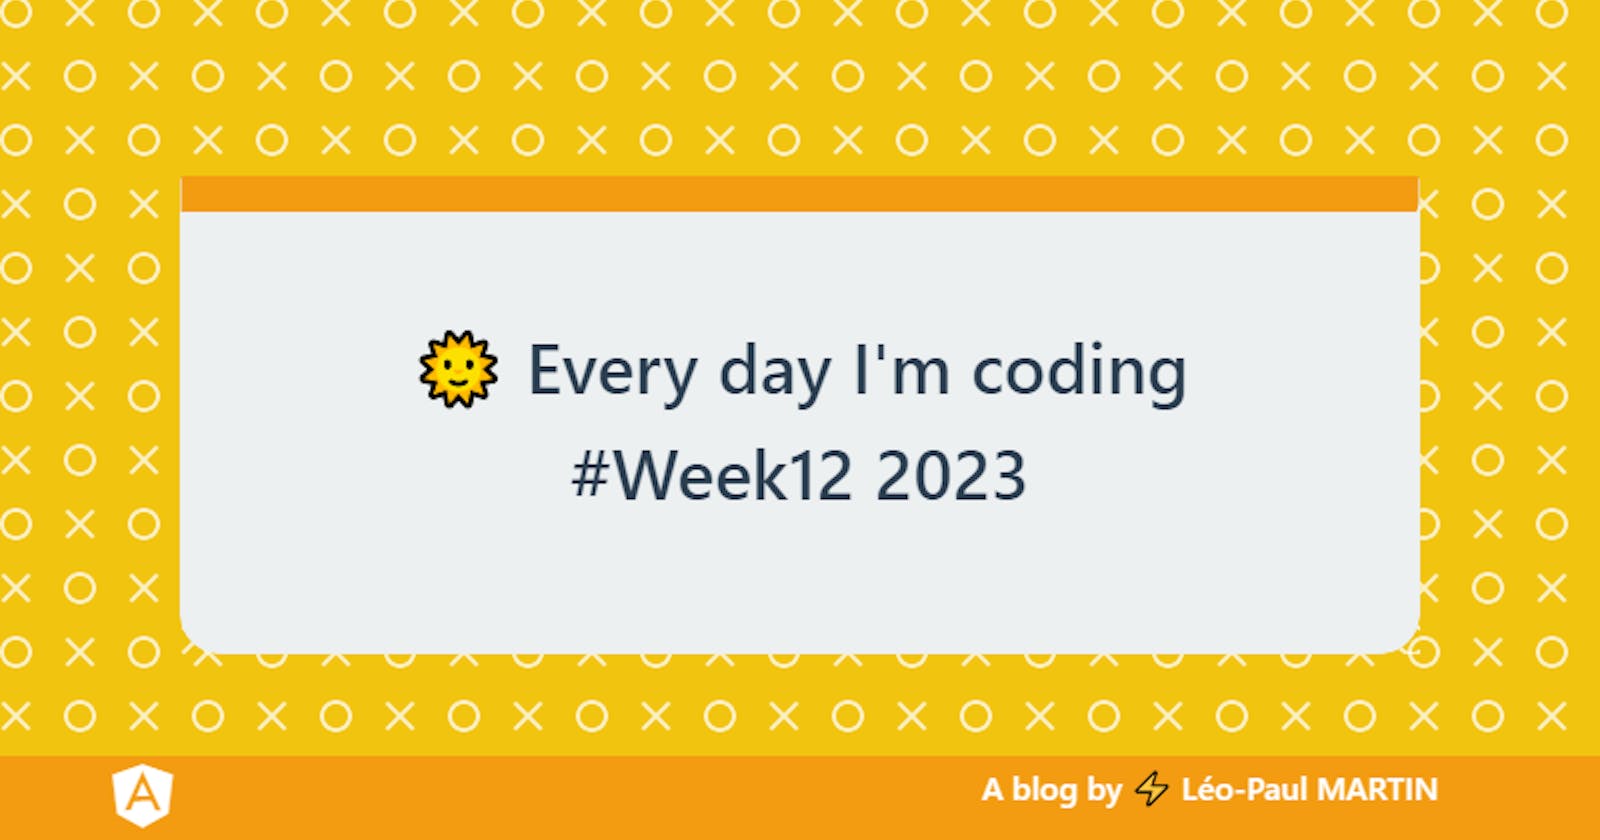 🌞 Every day I'm coding #Week12 2023